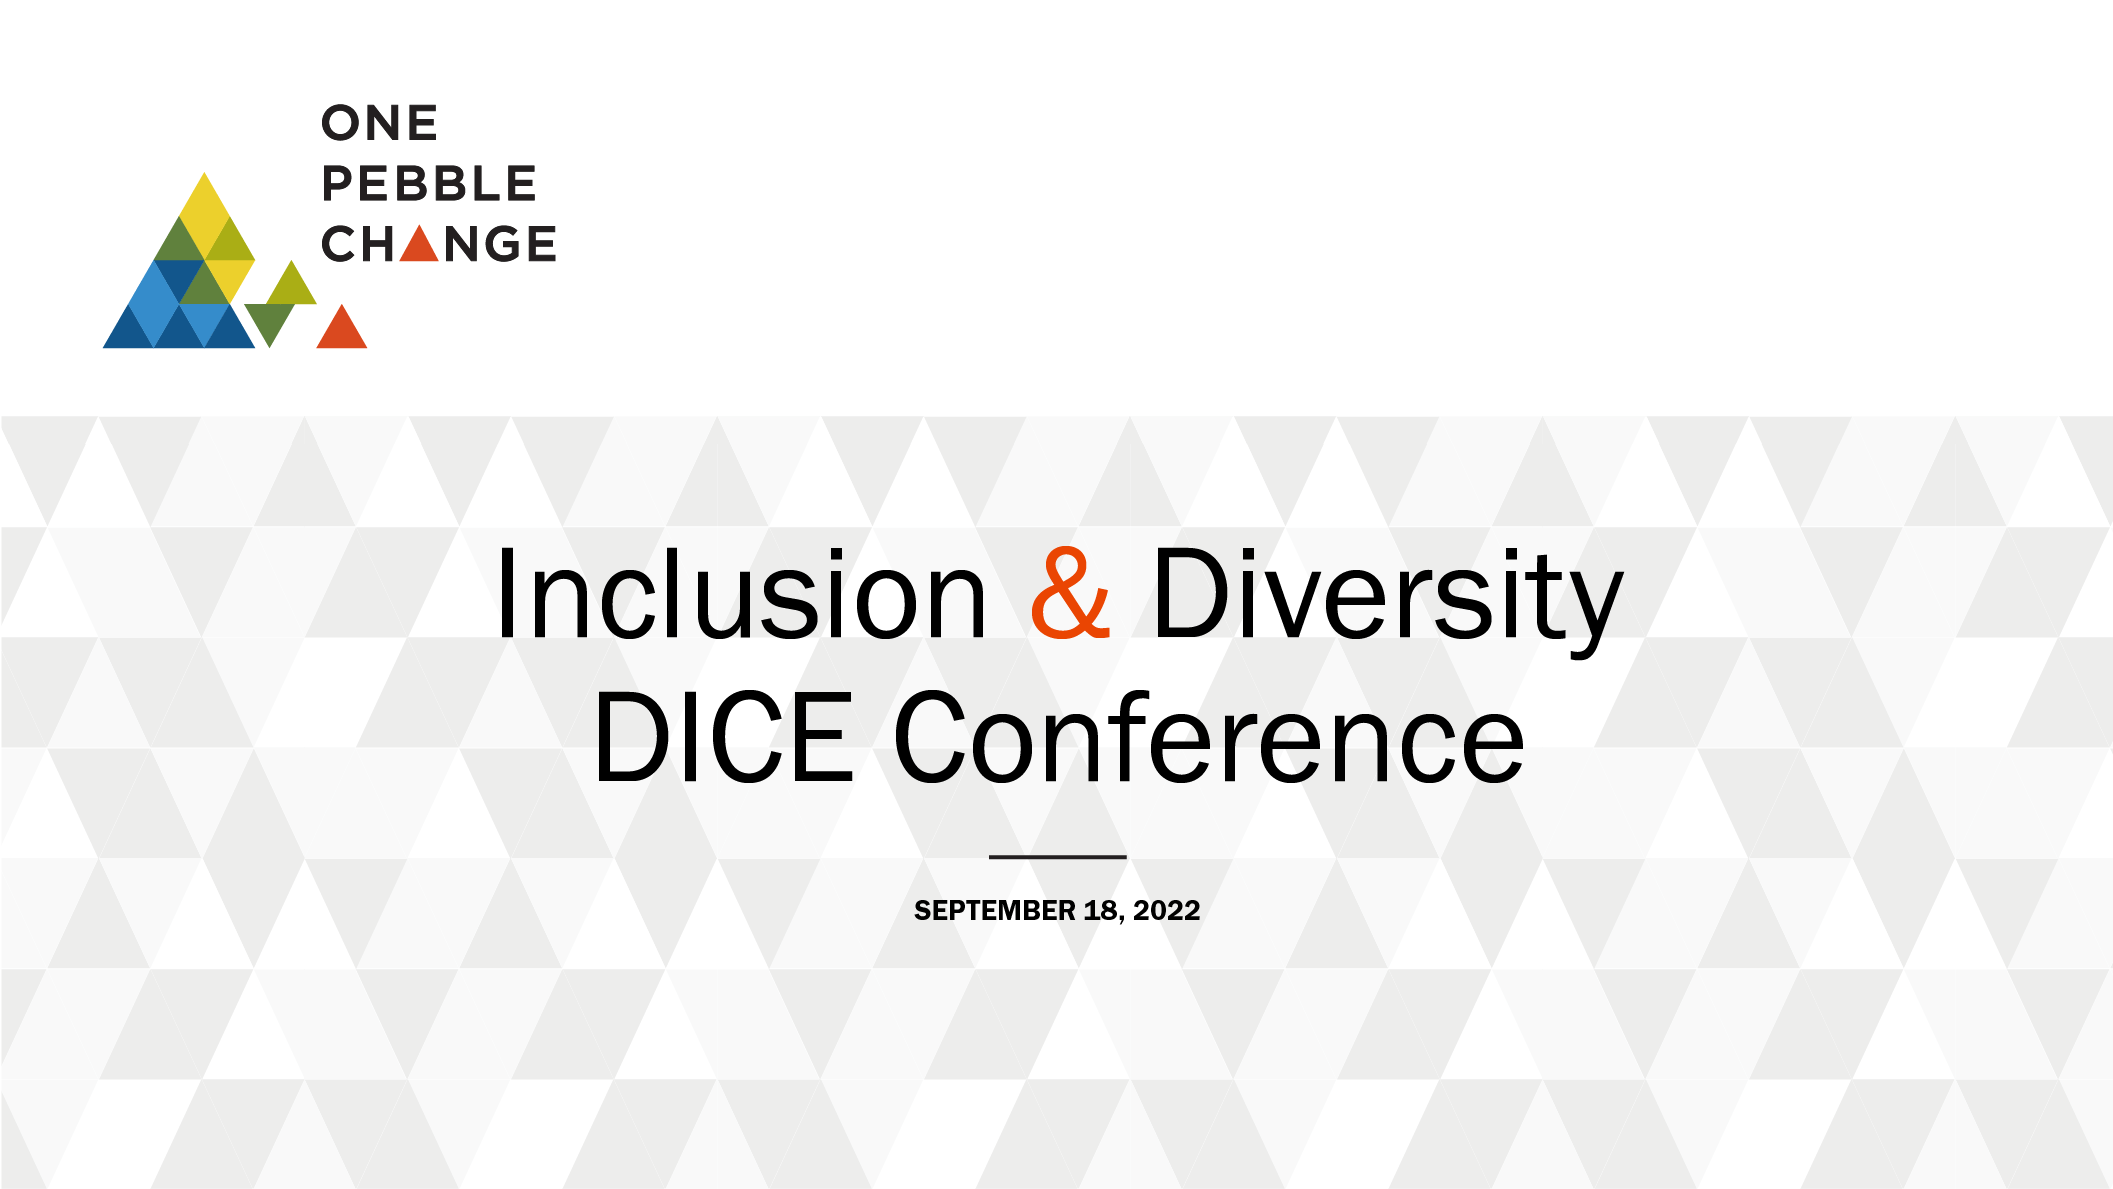 One Pebble Change powerpoint title page: Inclusion & Diversity DICE Conference